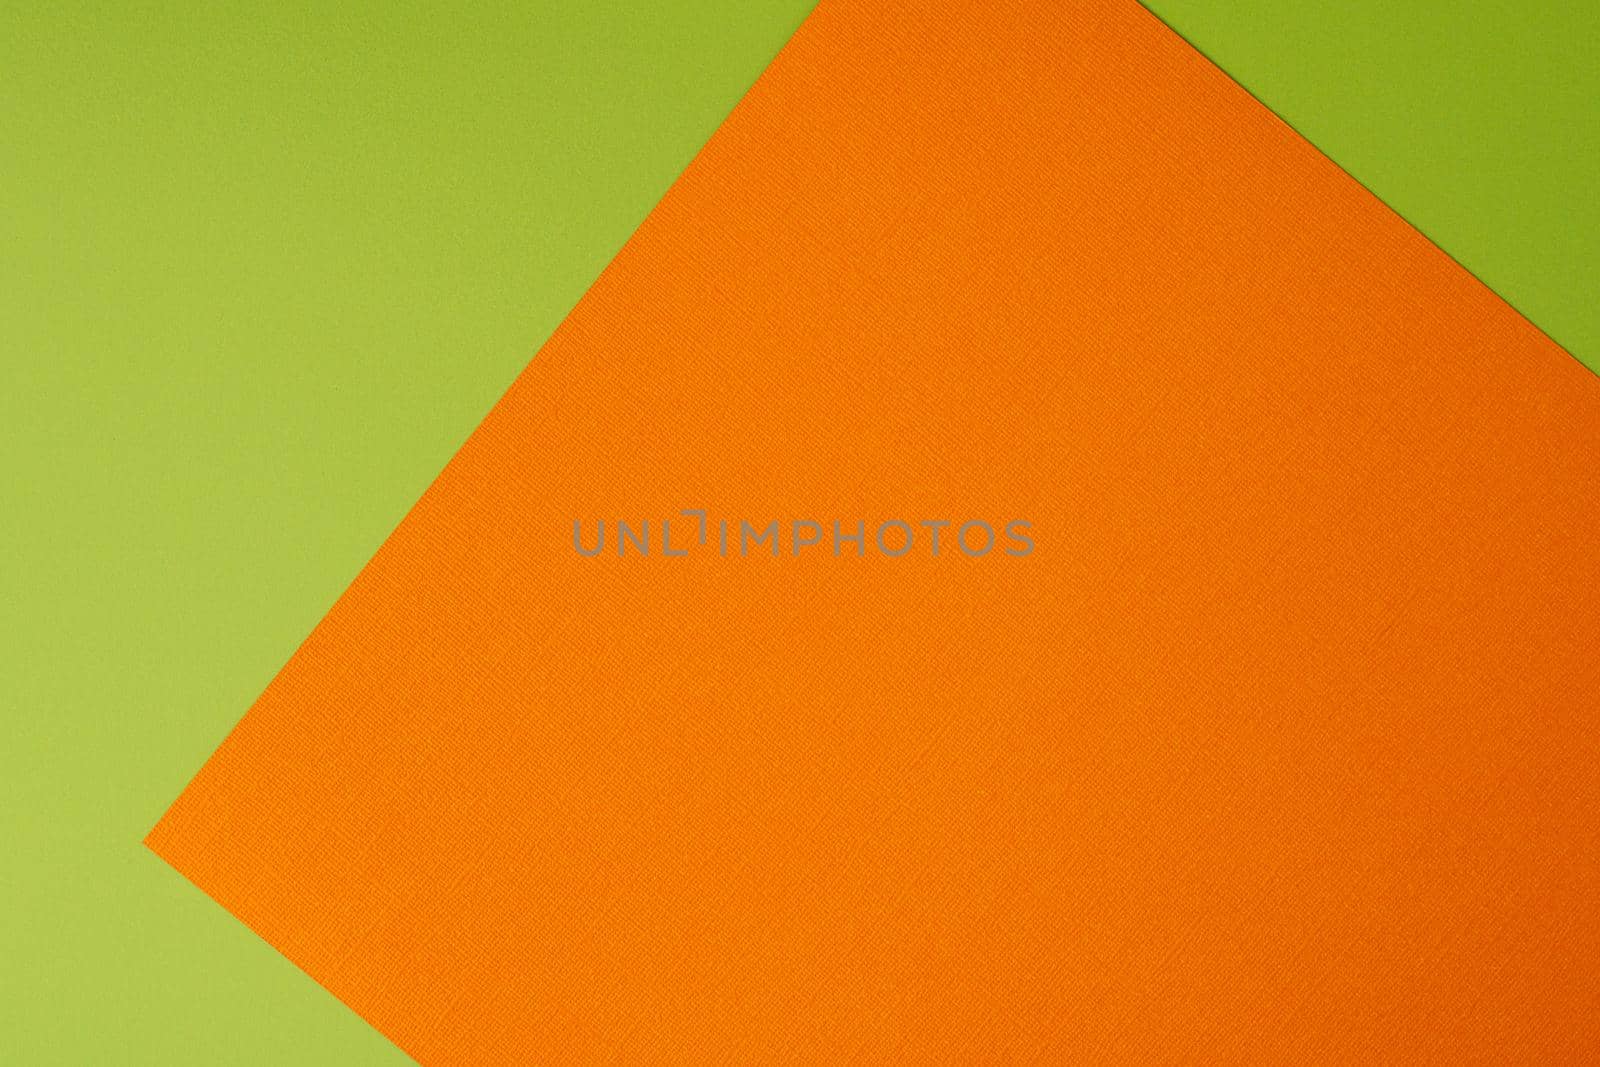 Orange and green colored background of overlapped cardboard layered geometric shaped sheets. Abstract design concept. Surface elements. Shredded texture, craft backdrop